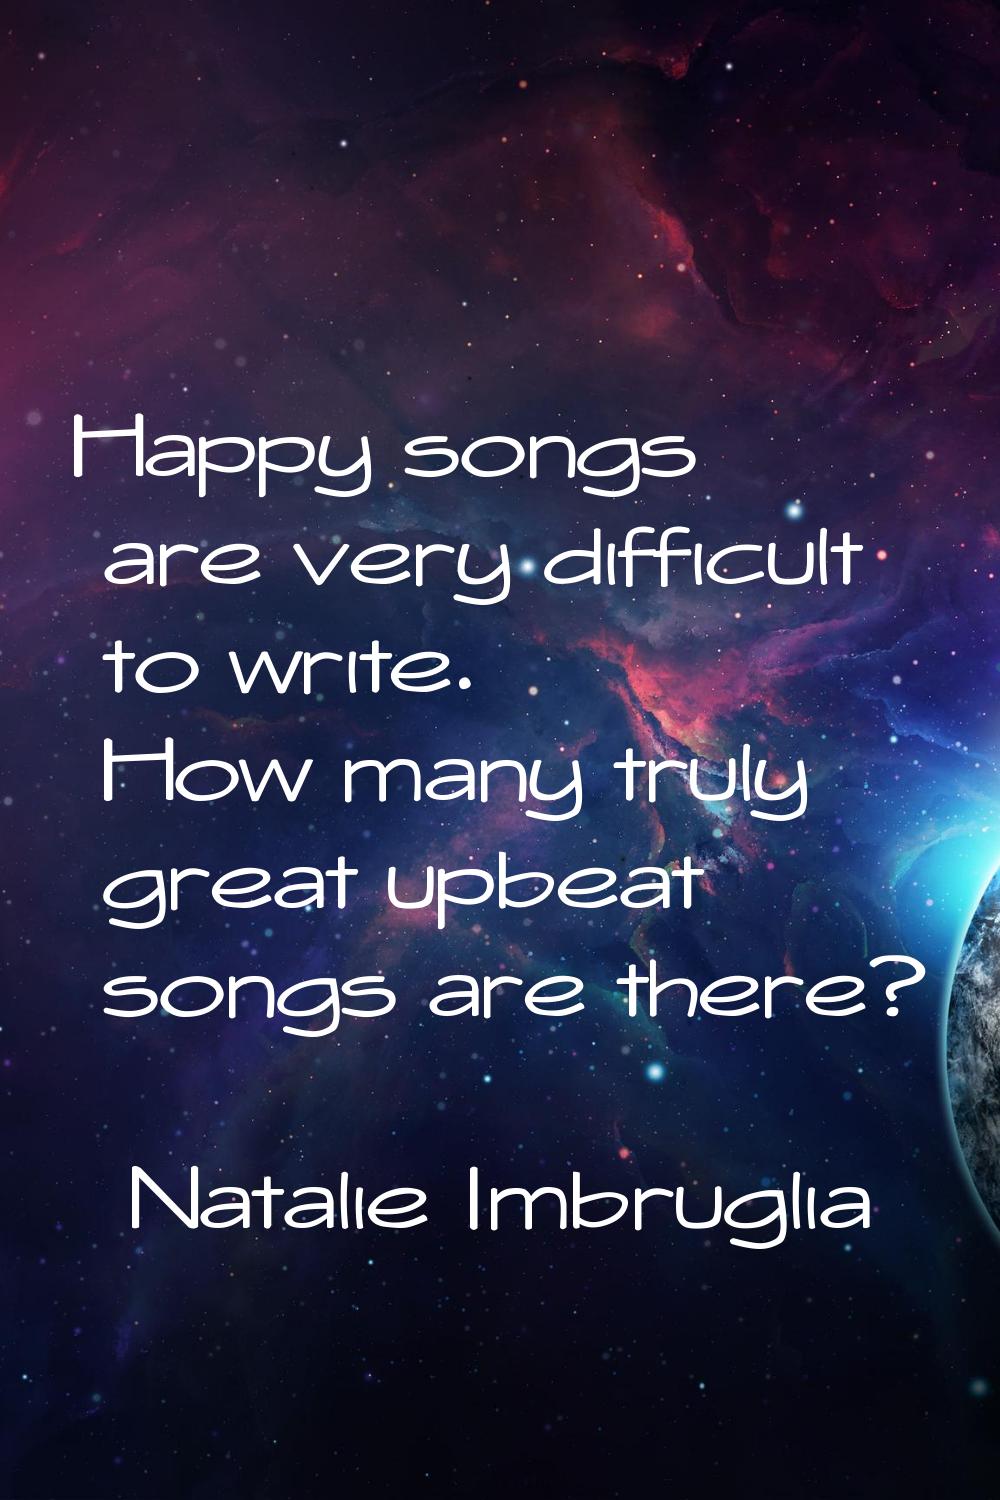 Happy songs are very difficult to write. How many truly great upbeat songs are there?